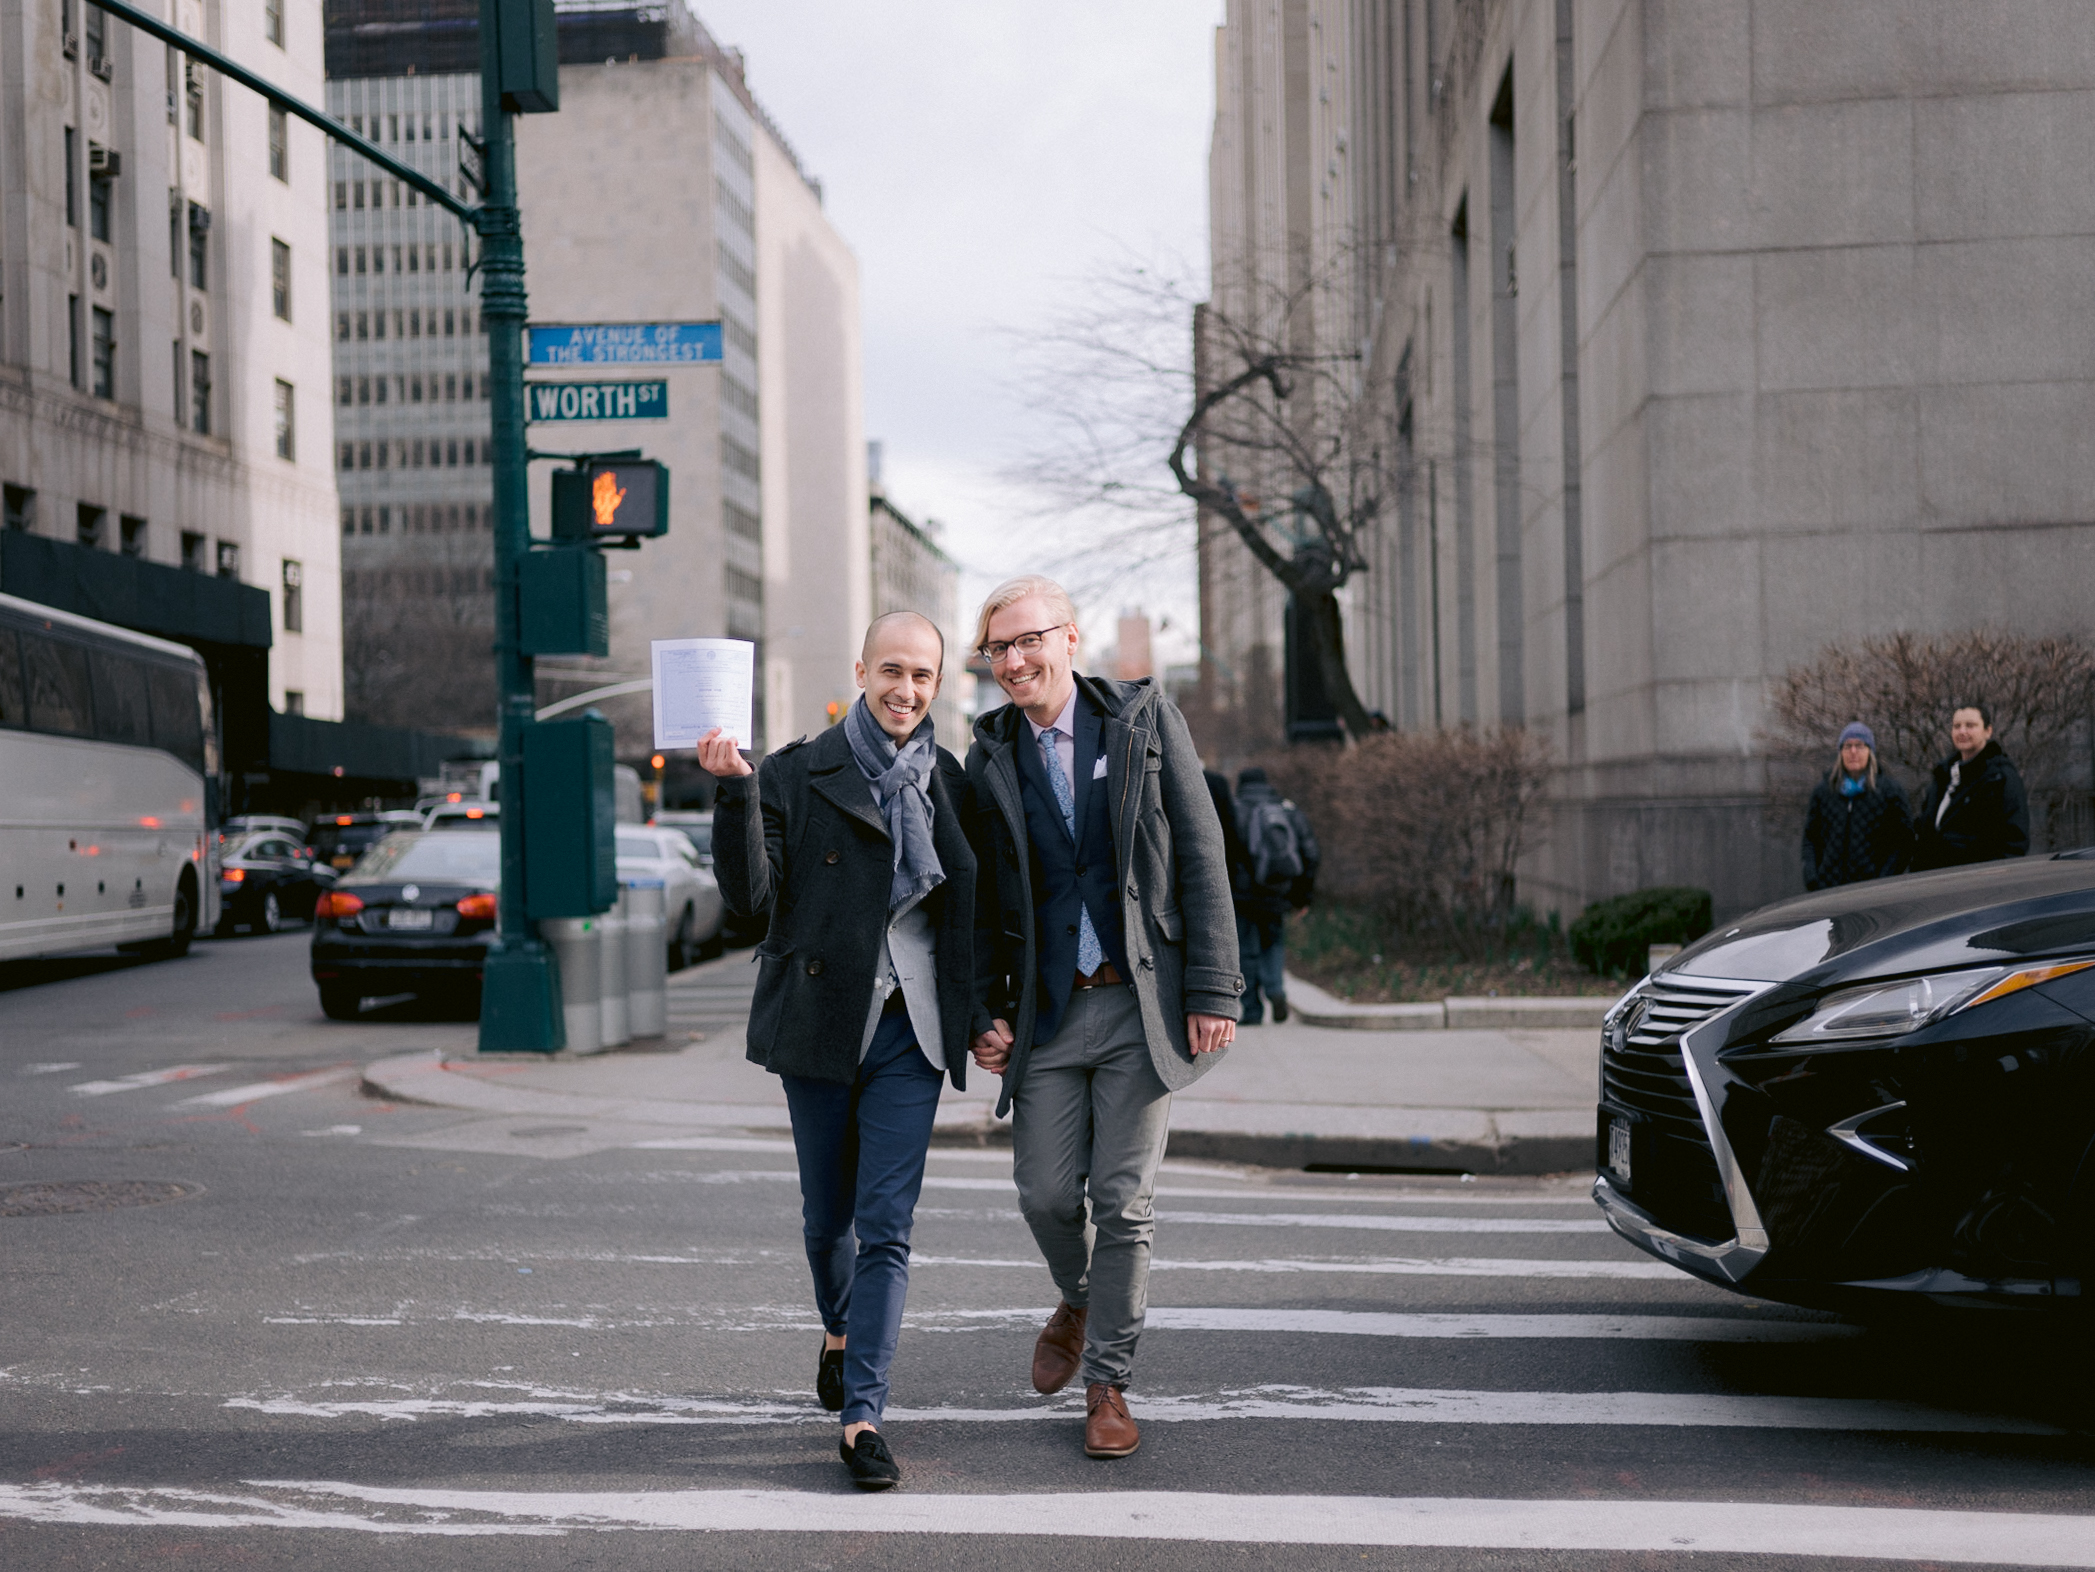 The two grooms are crossing Worth Street after their wedding ceremony at NYC City Hall. Elopement image by Jenny Fu Studio